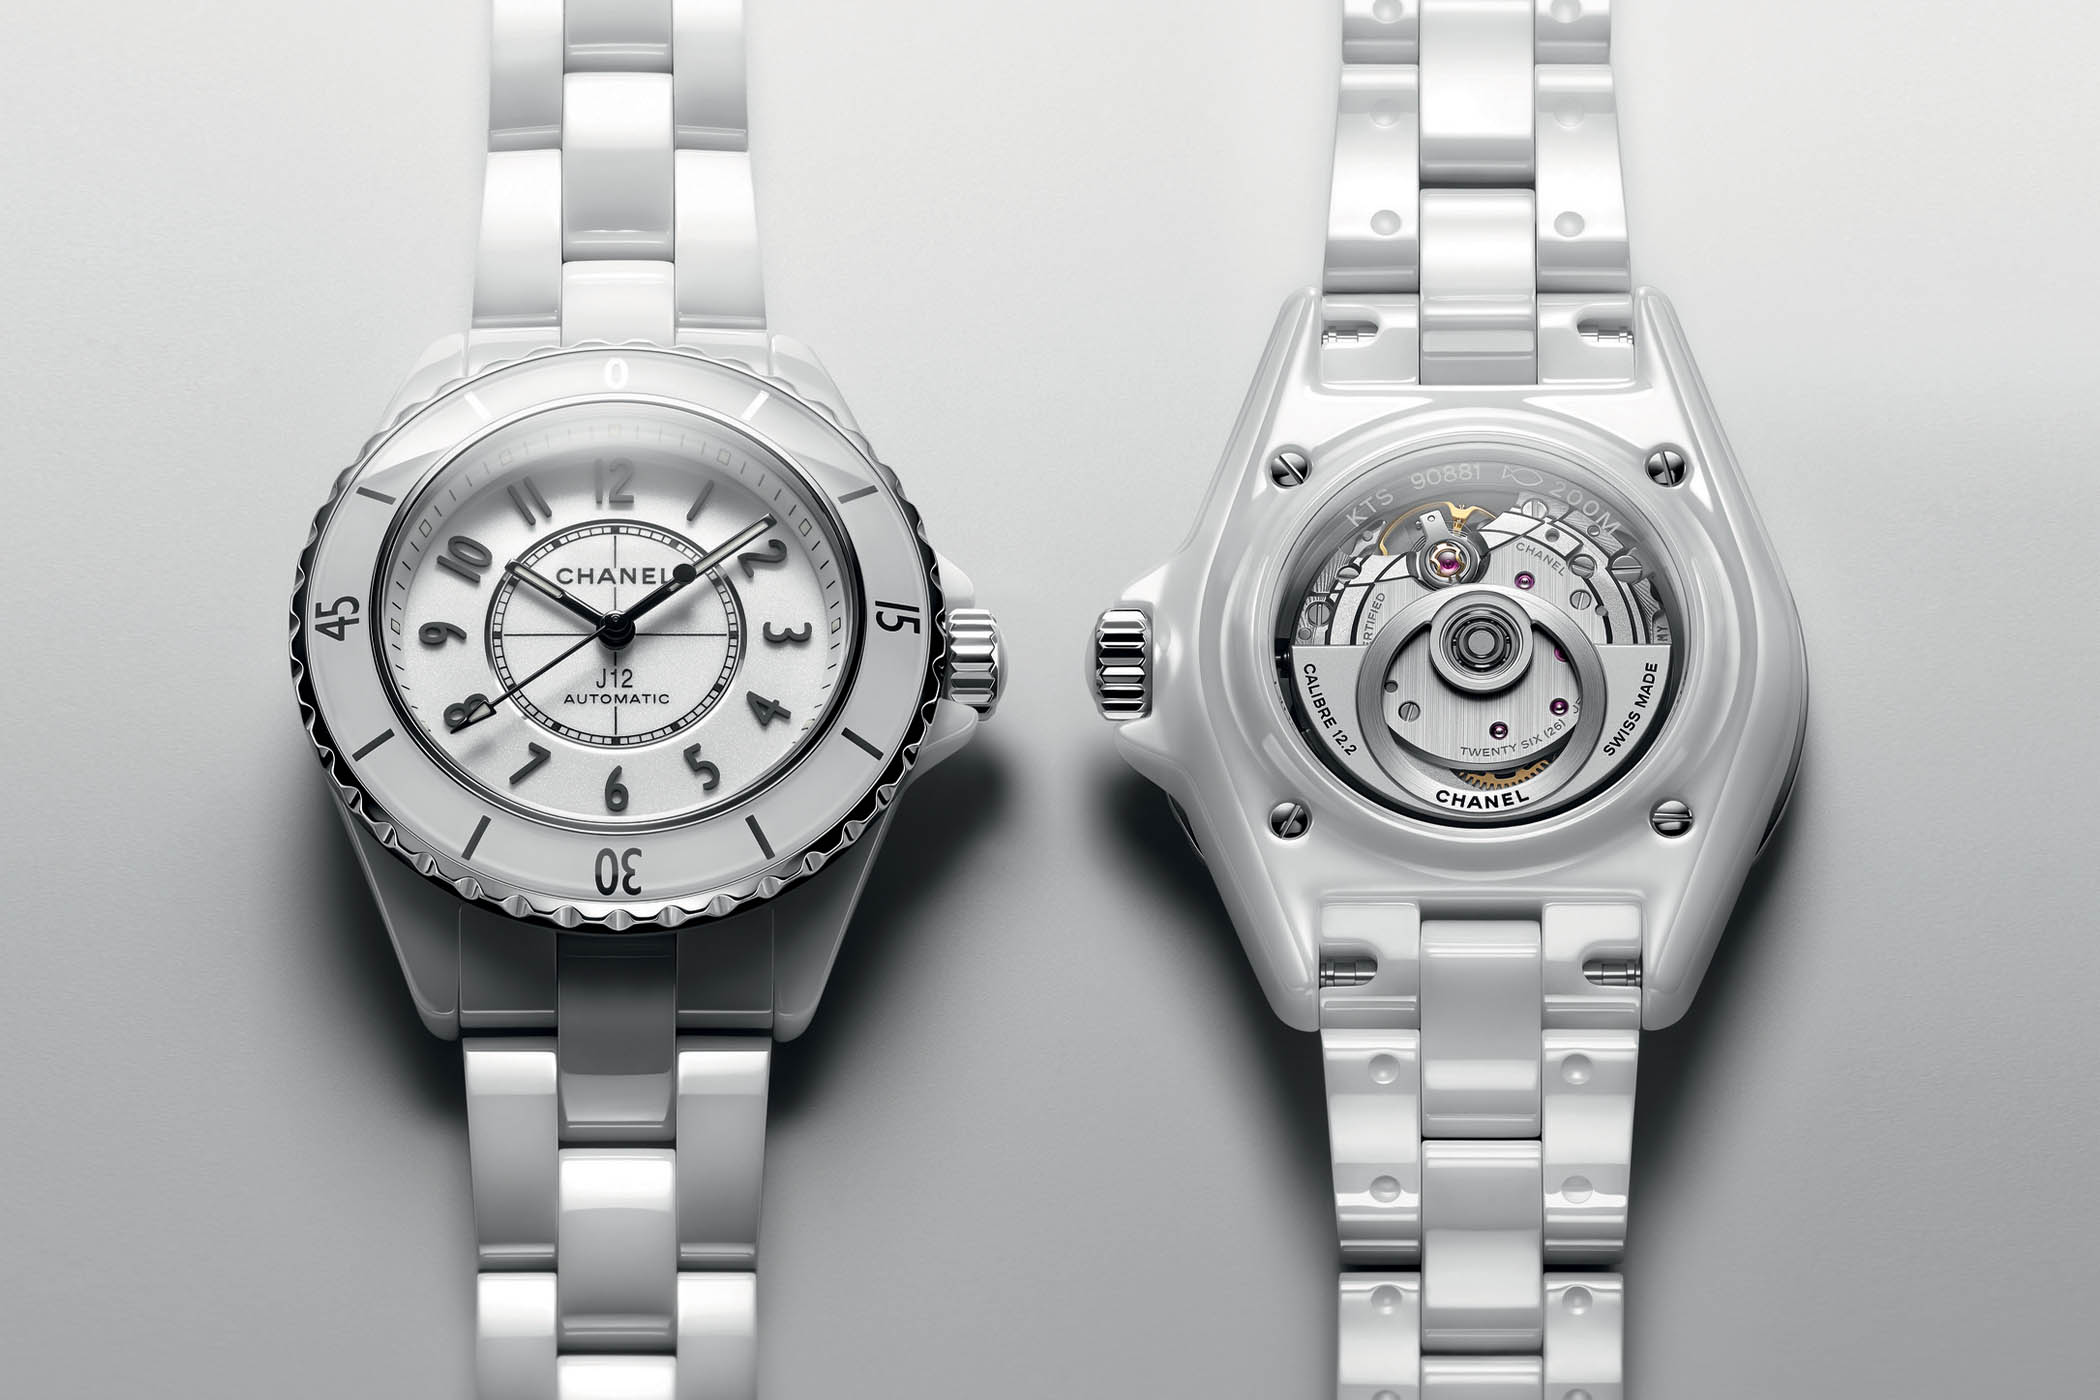 Introducing - Chanel J12 33mm Calibre 12.2 (Watches and Wonders )